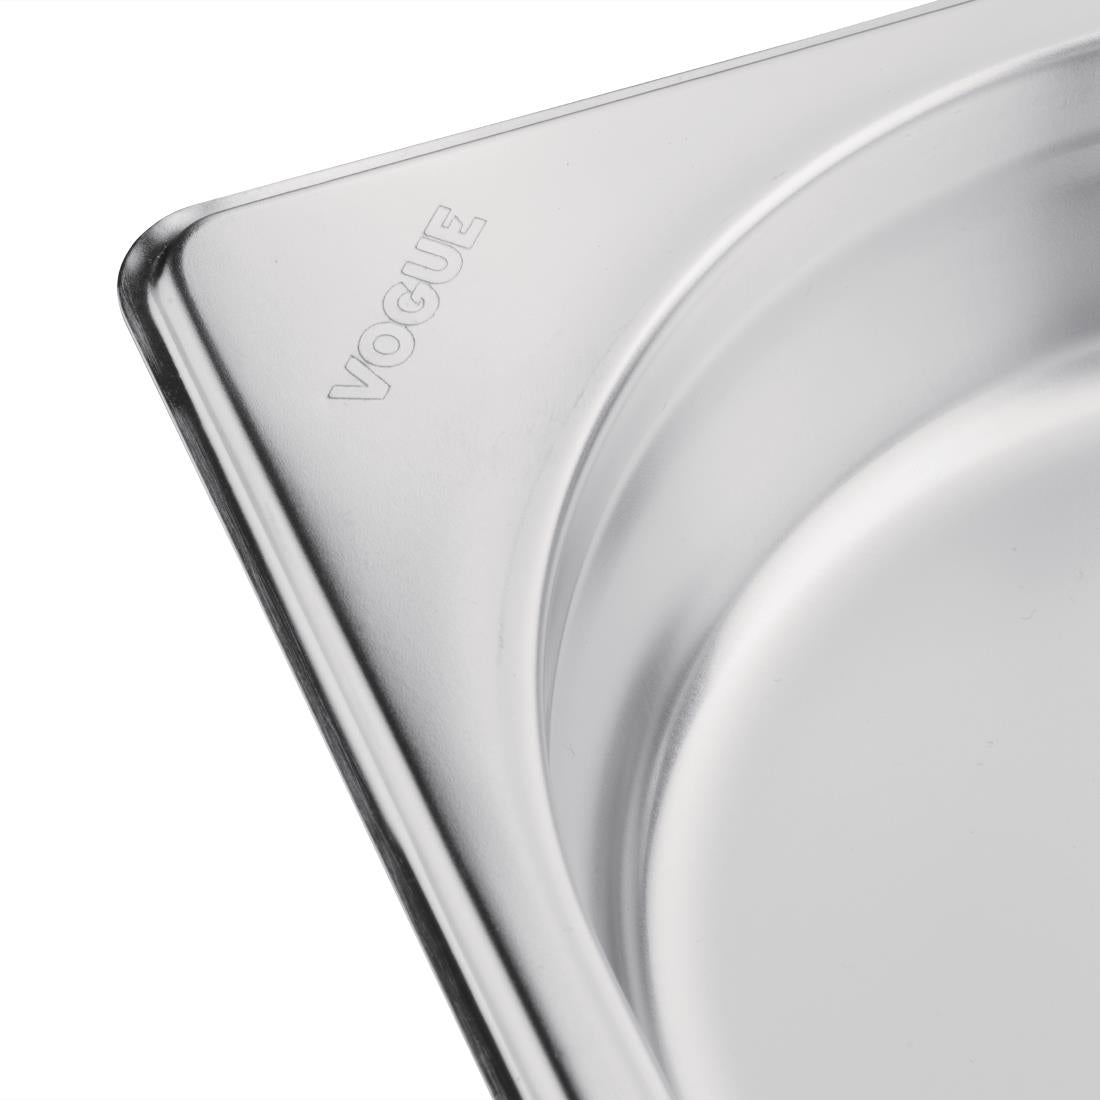 Vogue Stainless Steel 1/2 Gastronorm Pan 65mm